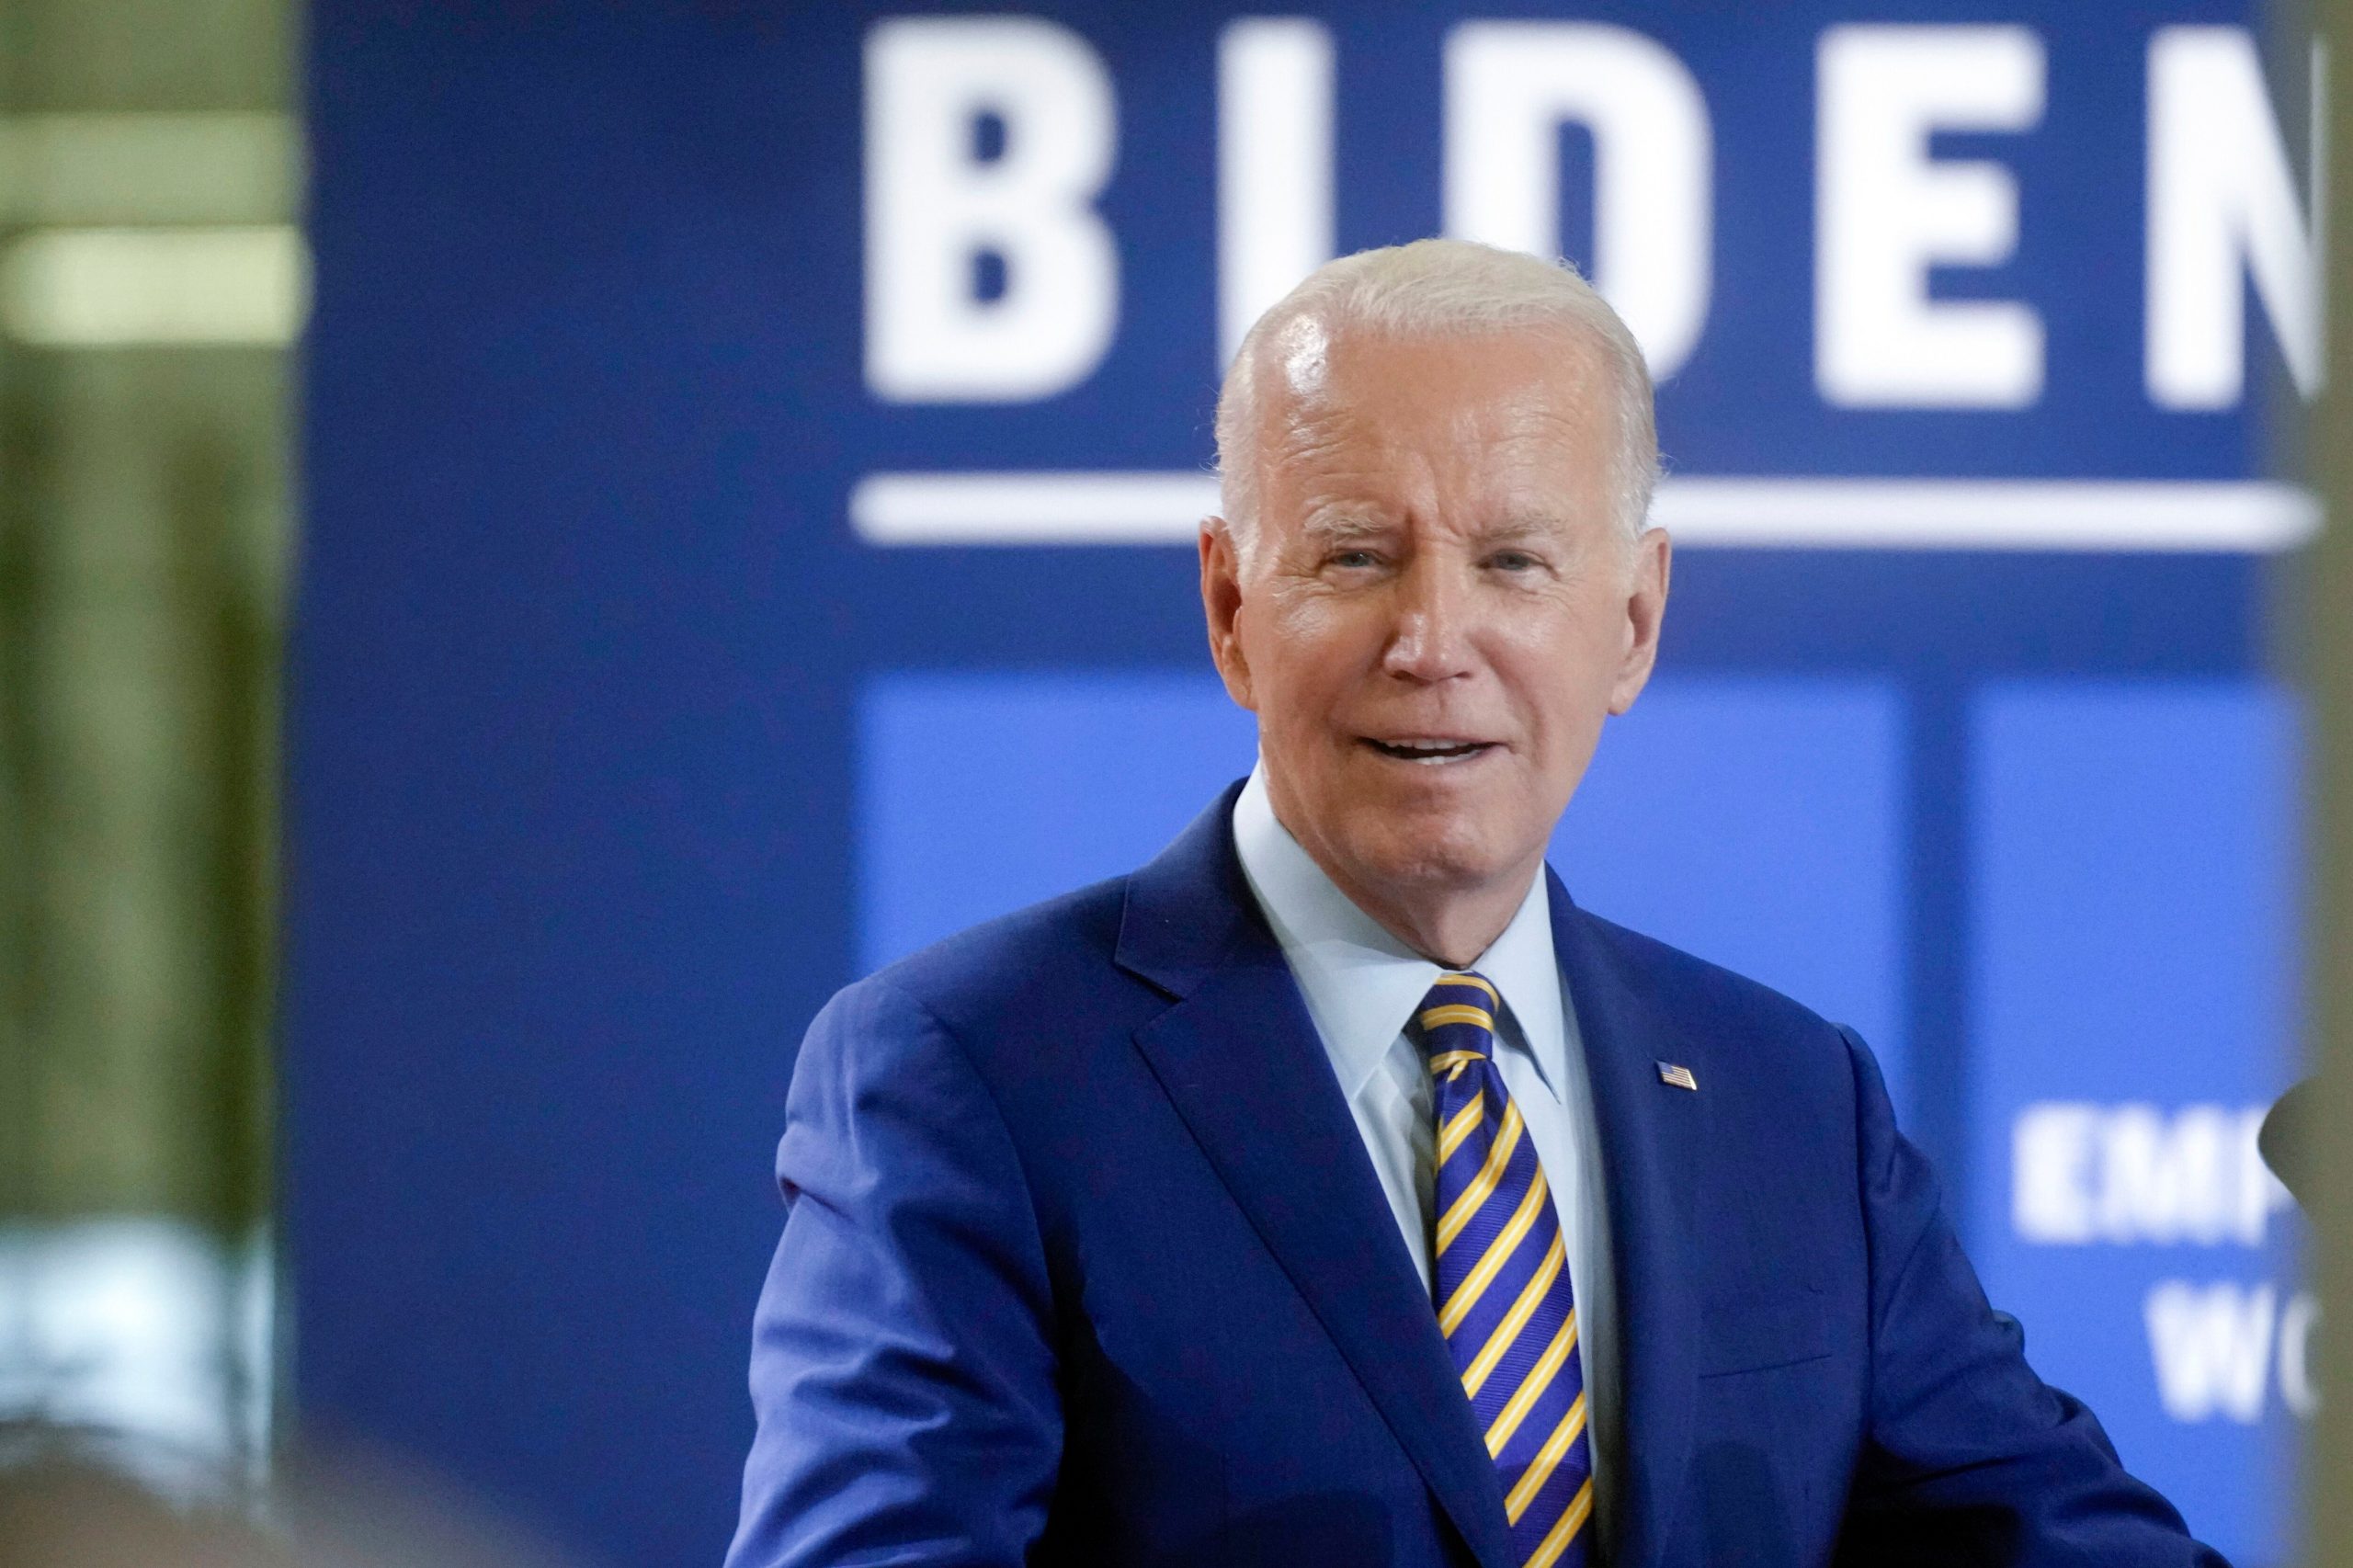 ‘Messed up’: Americans react to Biden’s handling of the economy and ‘Bidenomics’ push